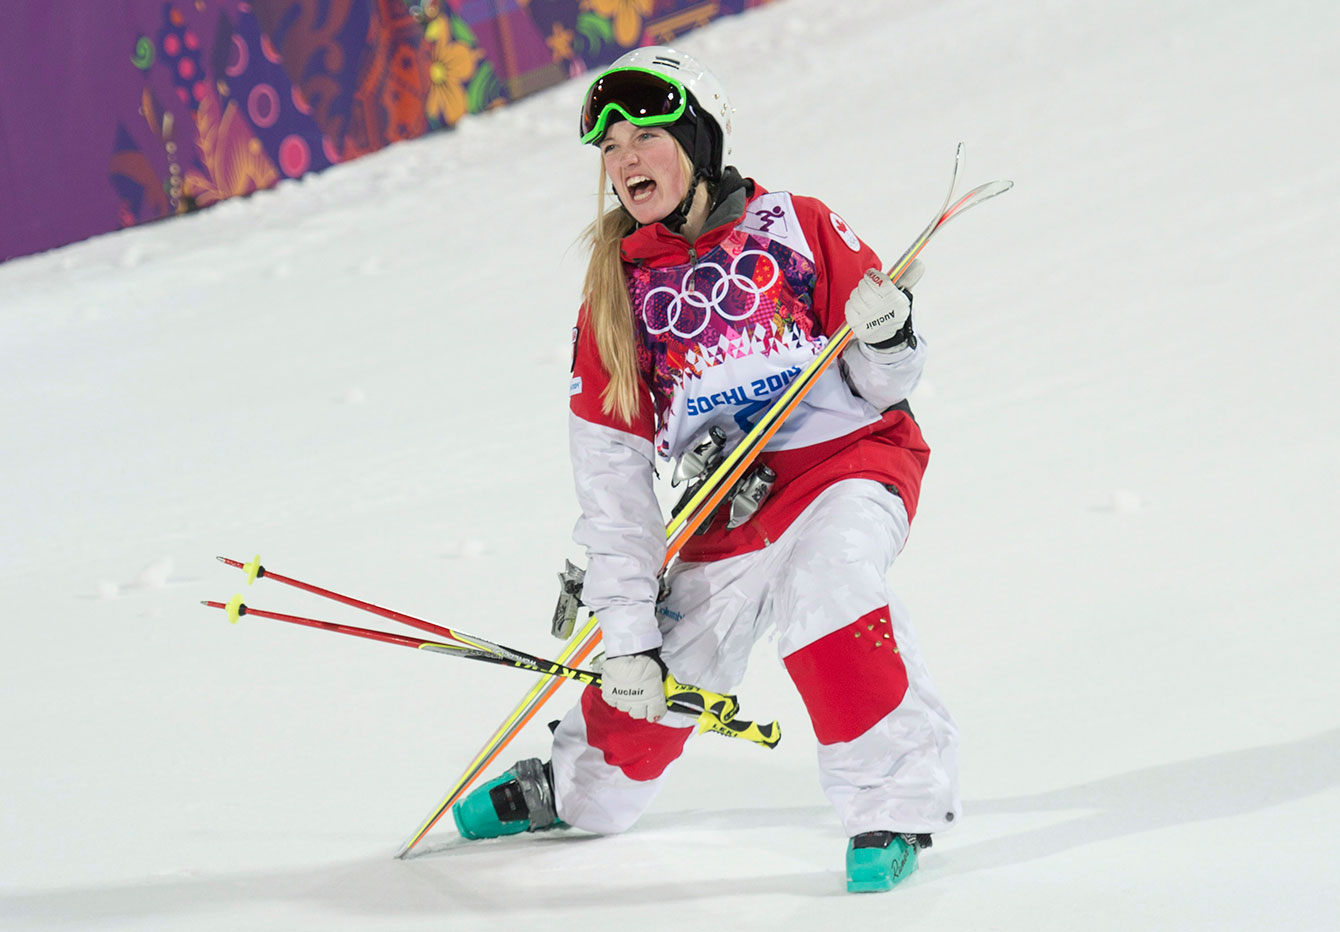 Canada's Justine Dufour-Lapointe celebrates after winning the gold medal in the moguls at the Sochi Winter Olympics Saturday February 8, 2014.